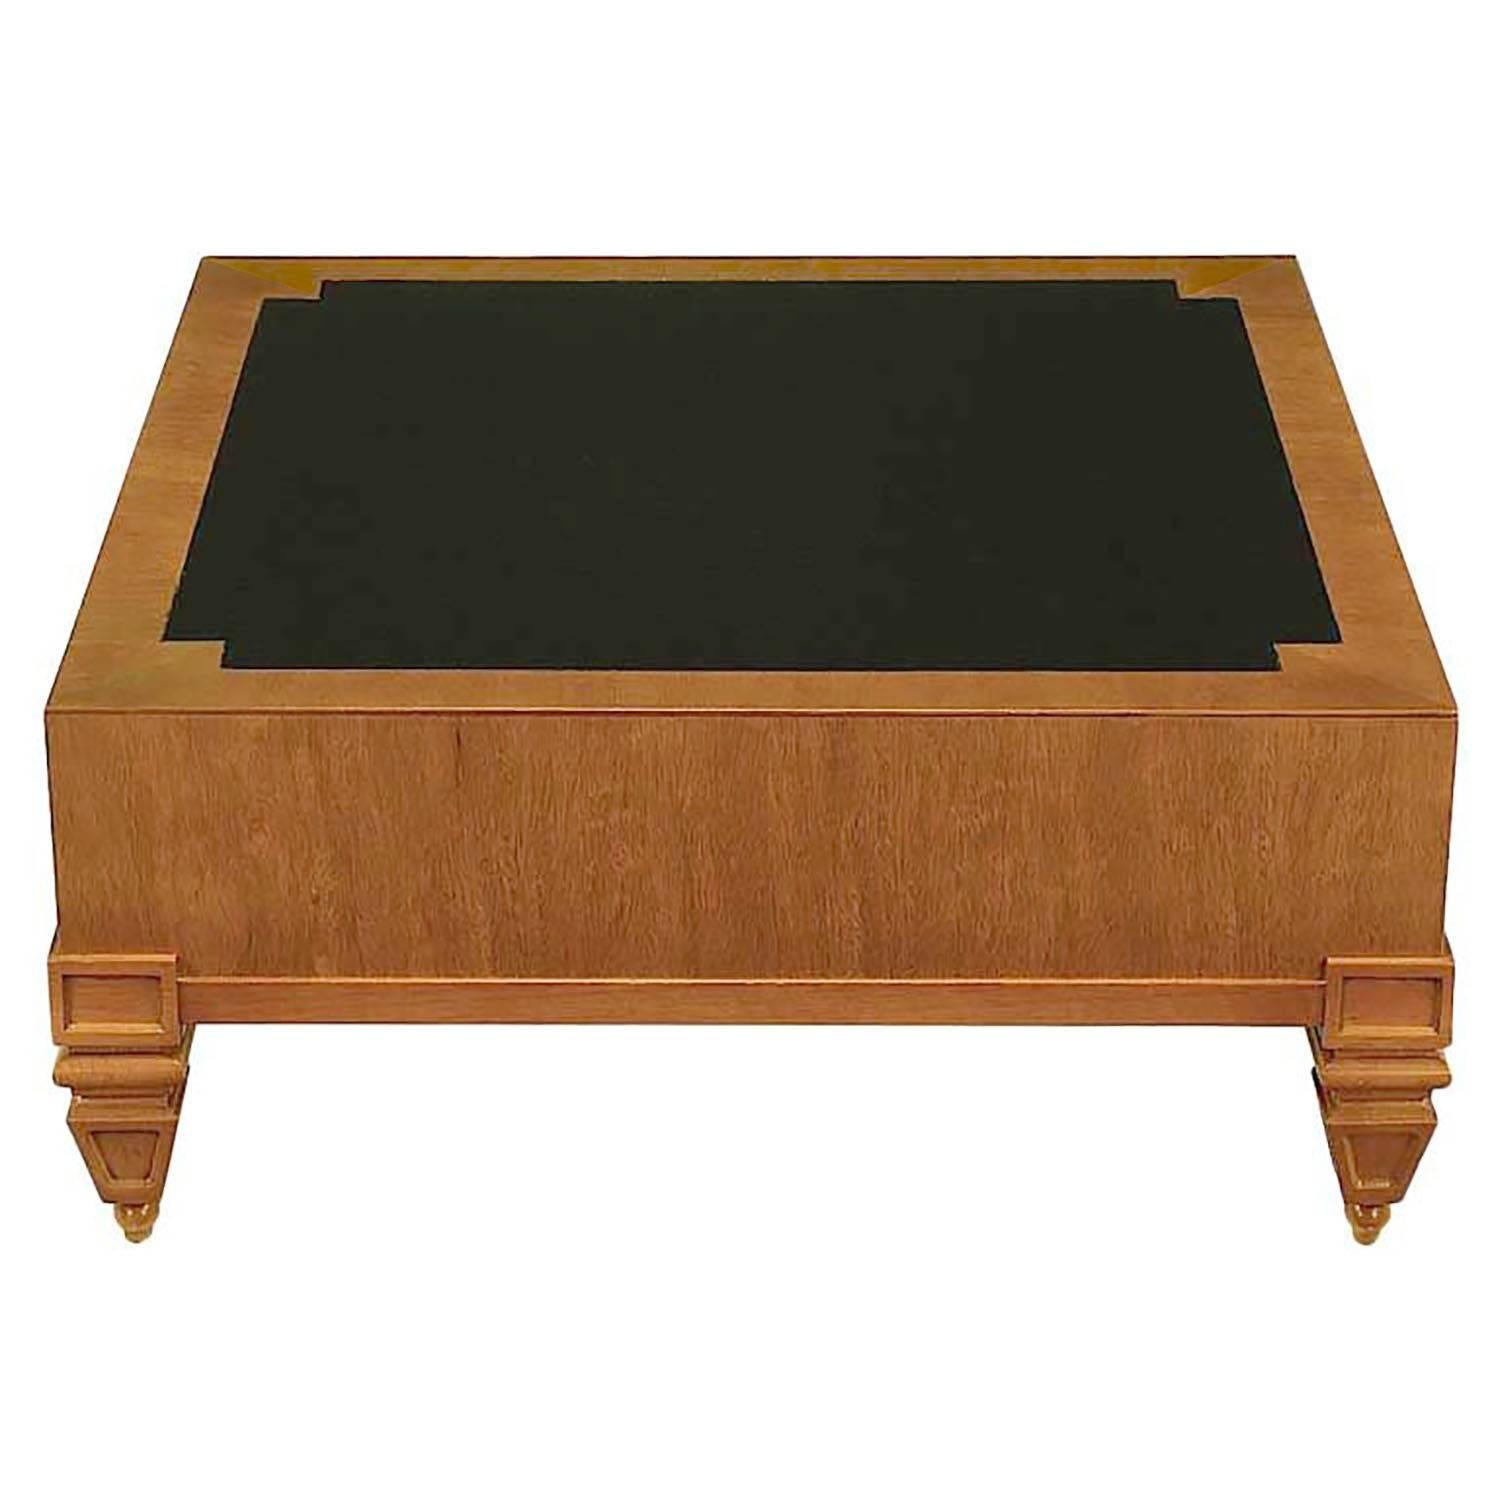 Unexpected and rare Tomlinson square bleached mahogany coffee table with black leather inlaid top. Clean lined with chunky Empire influenced solid mahogany inverted obelisk legs with ball feet. Great size for smaller sofa or in between a pair of